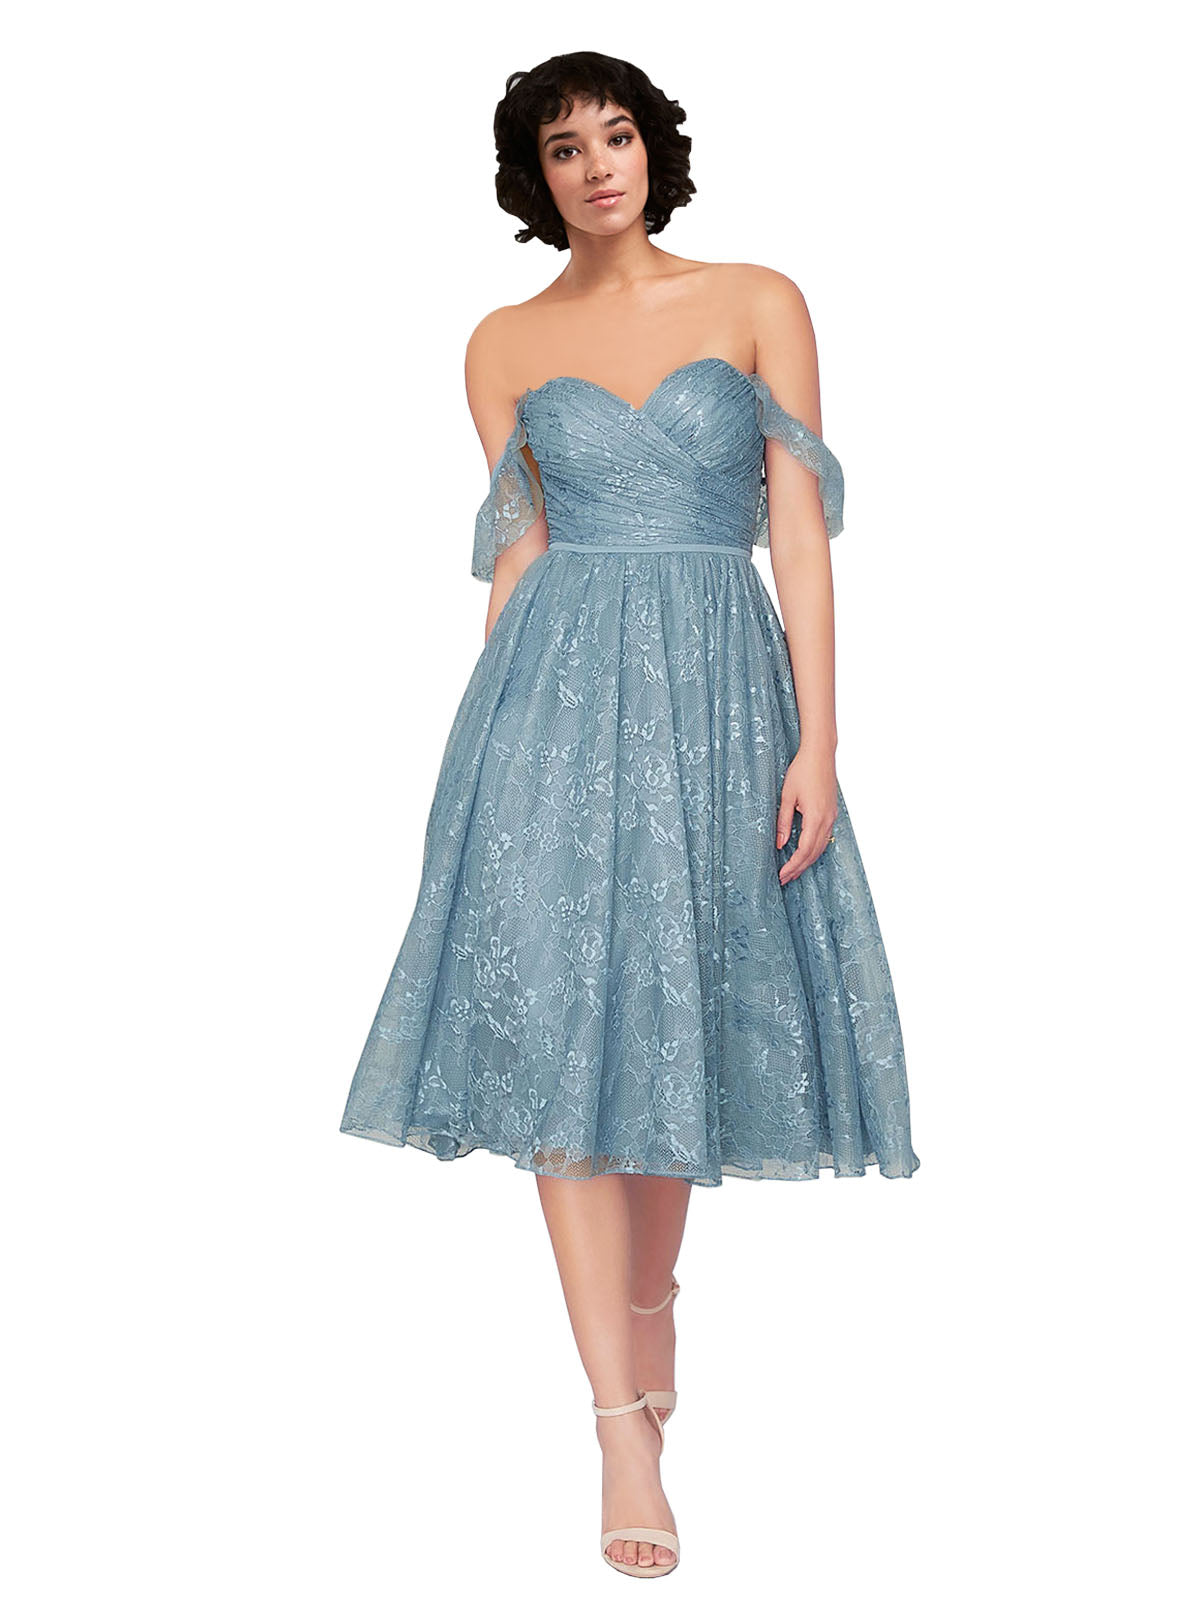 A-Line Sweetheart, Off the Shoulder Knee Length Long Bridesmaid Dress Donnell